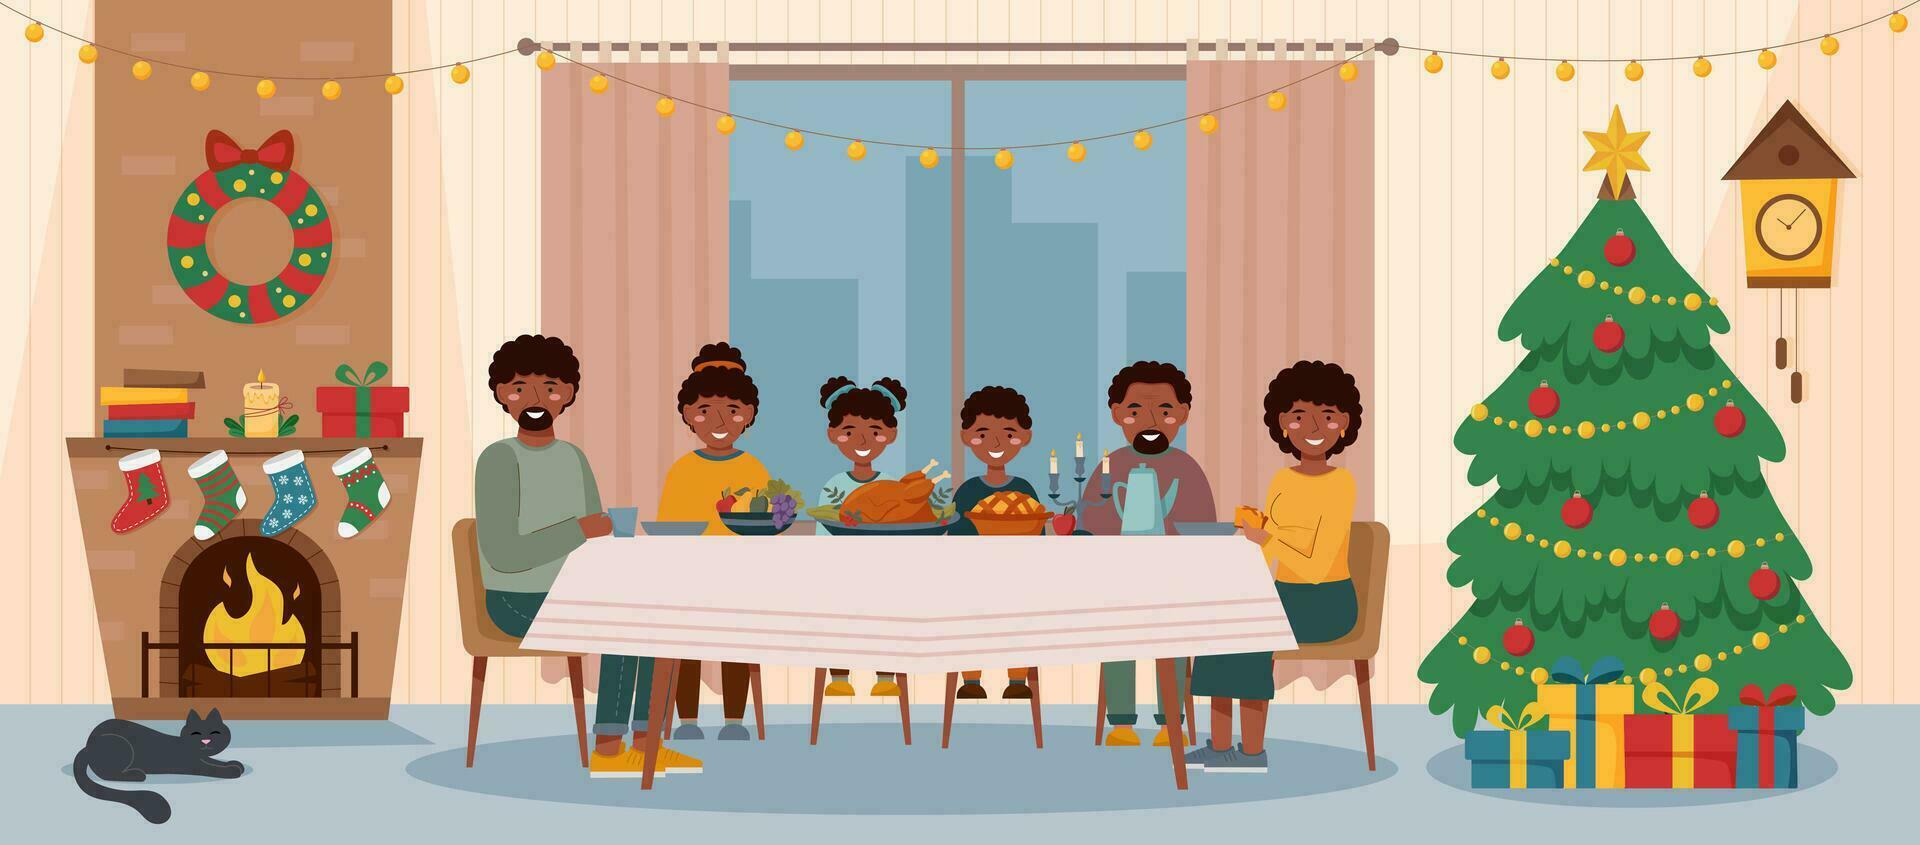 Family Christmas at the table vector